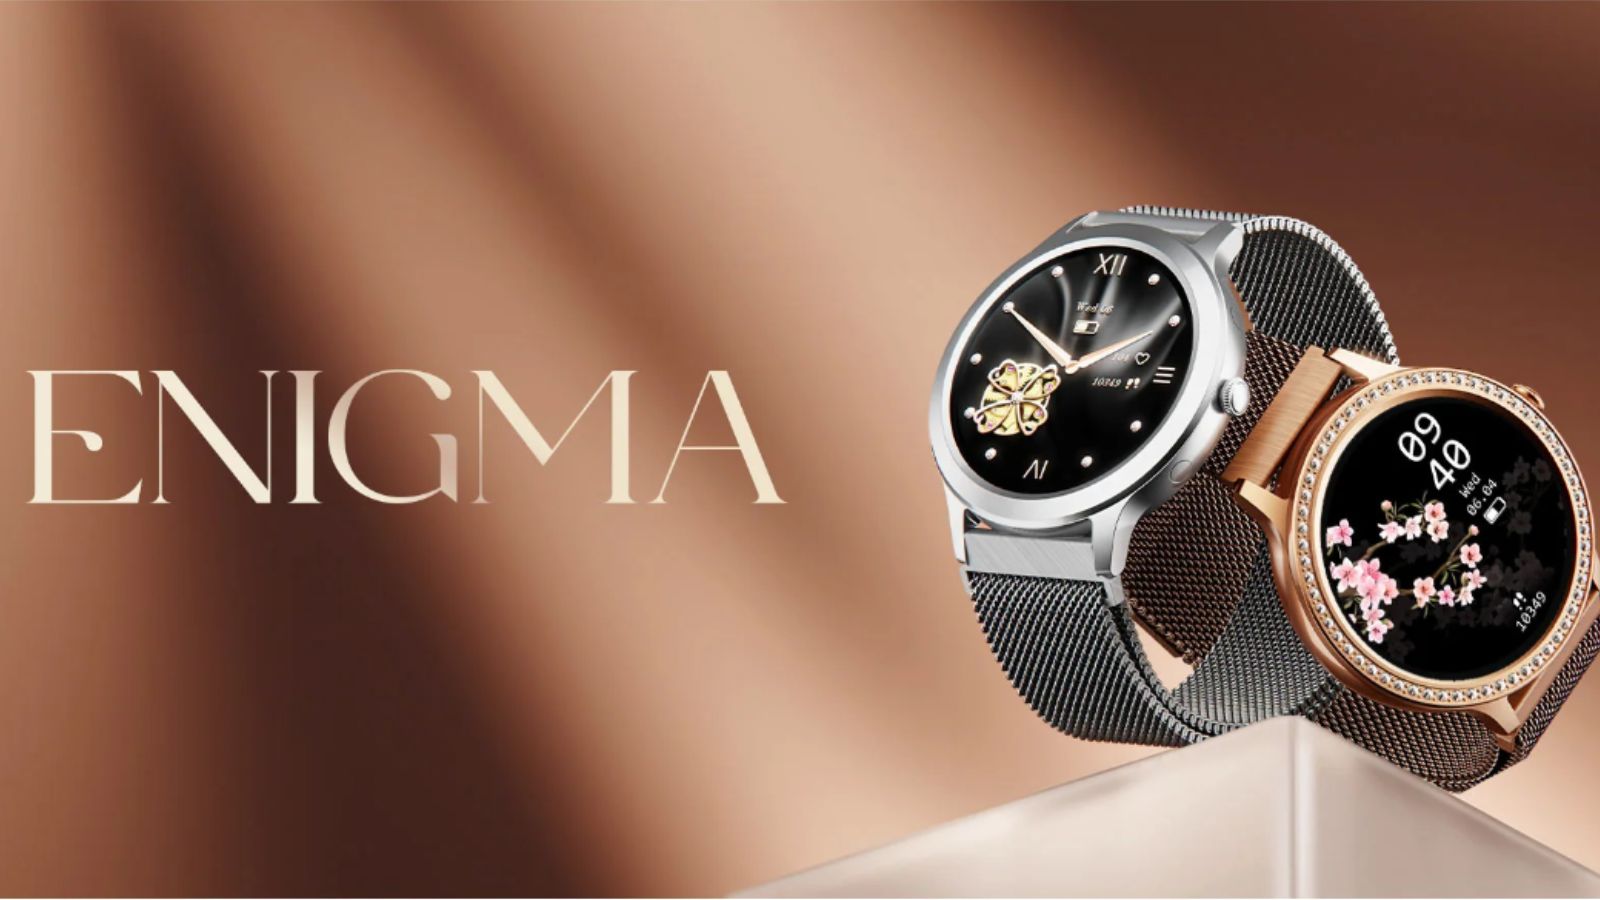 boAt Enigma R32 Woman-Centric Smartwatch Launches in India